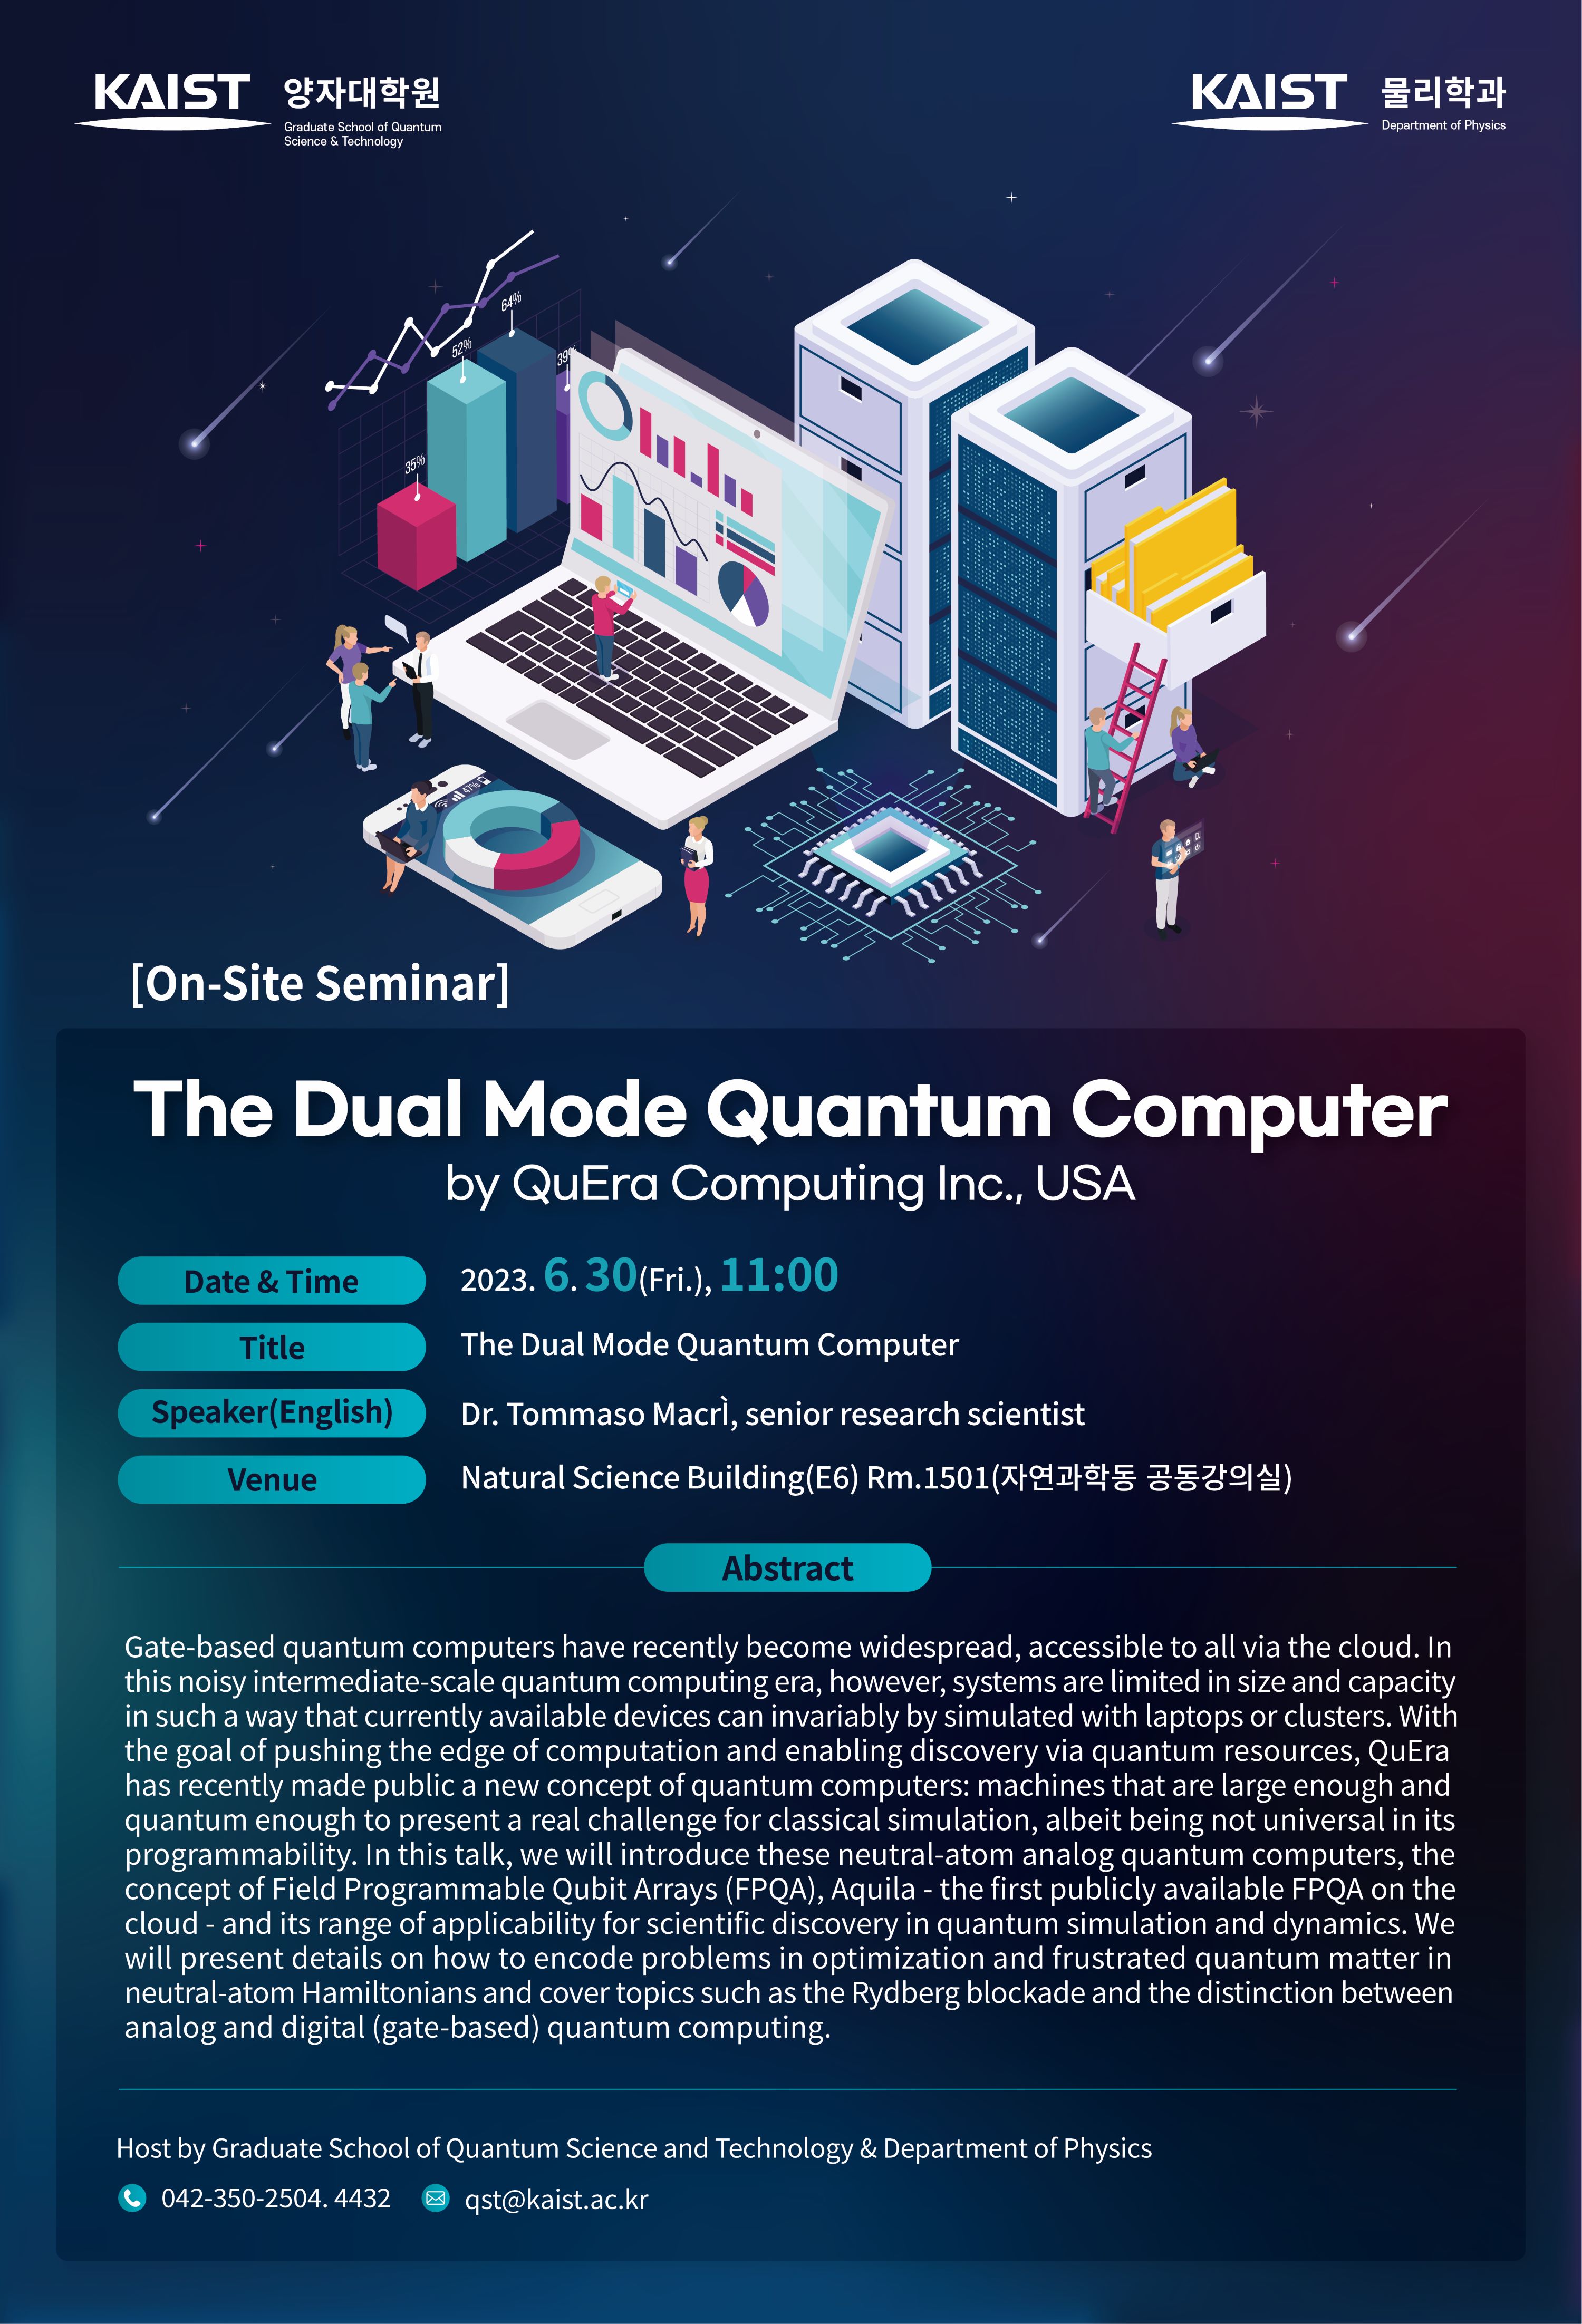 Poster_The Dual Mode Quantum Computer by QuEra Computing.jpg